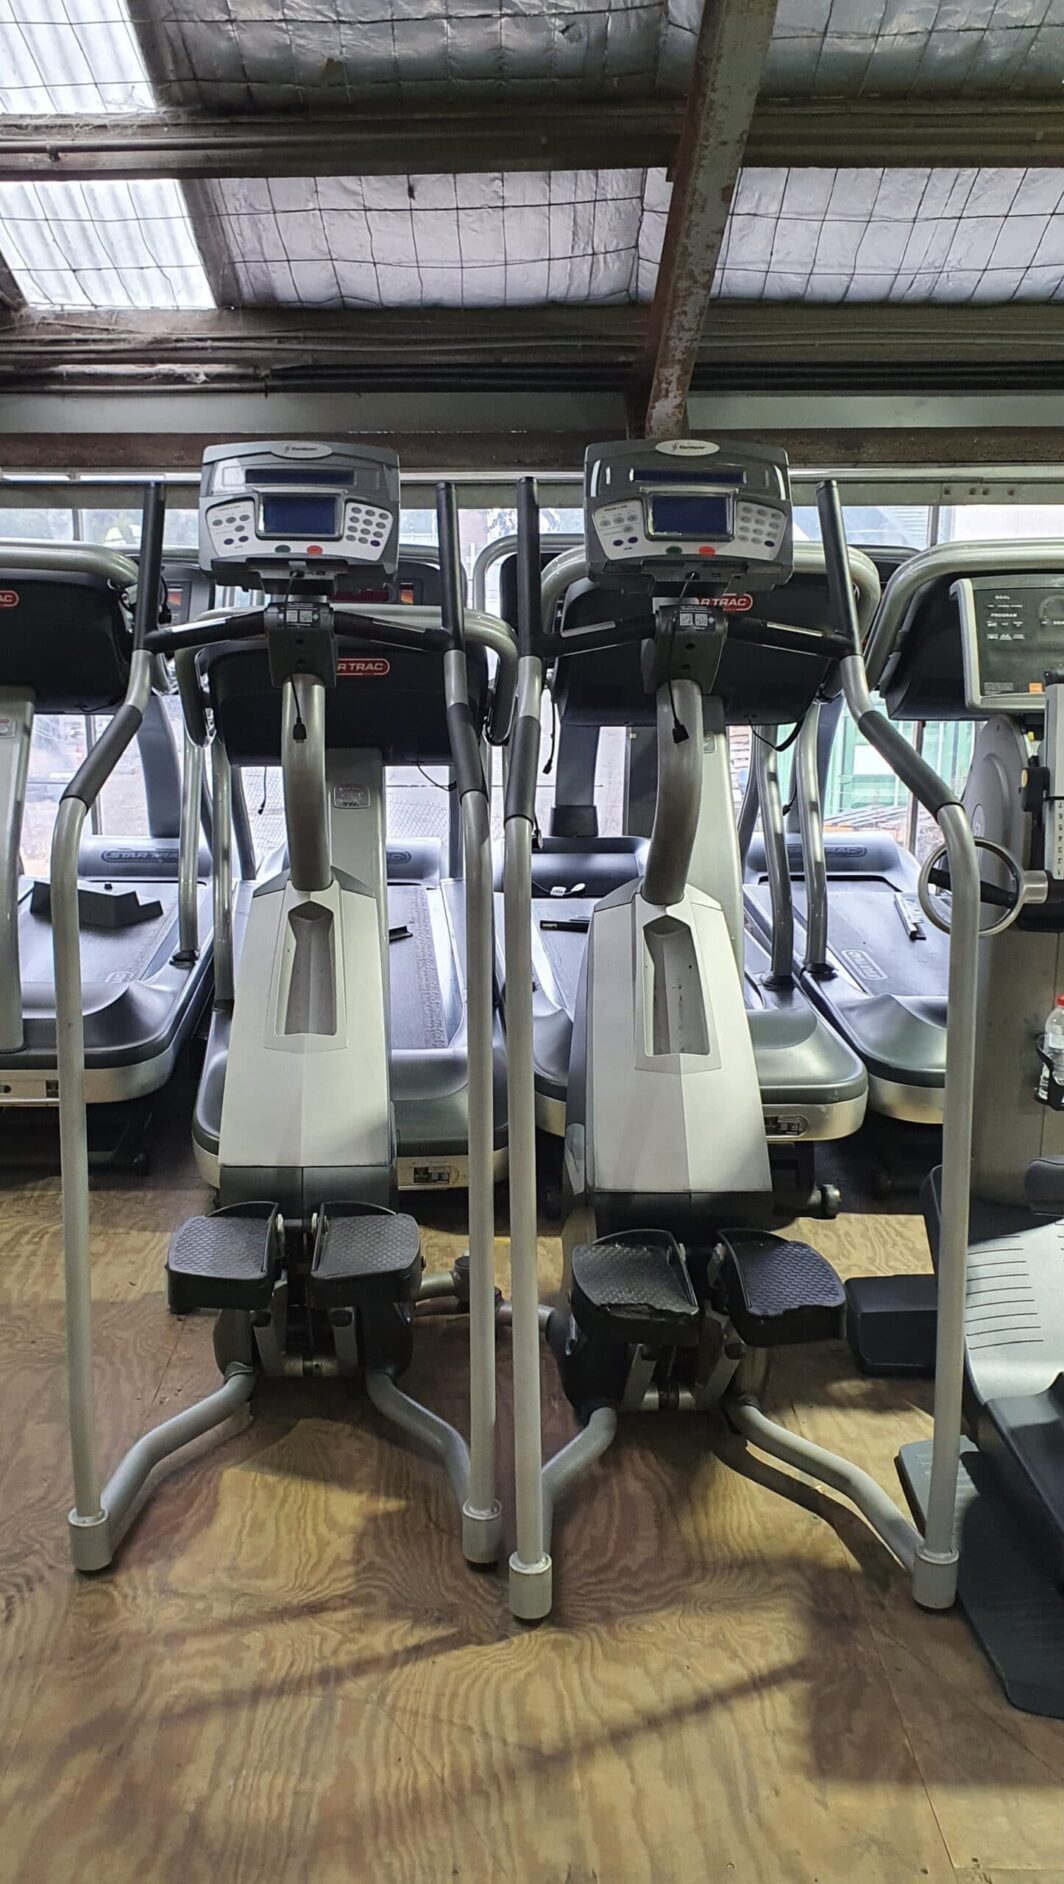 StairMaster Stepper used gym equipment